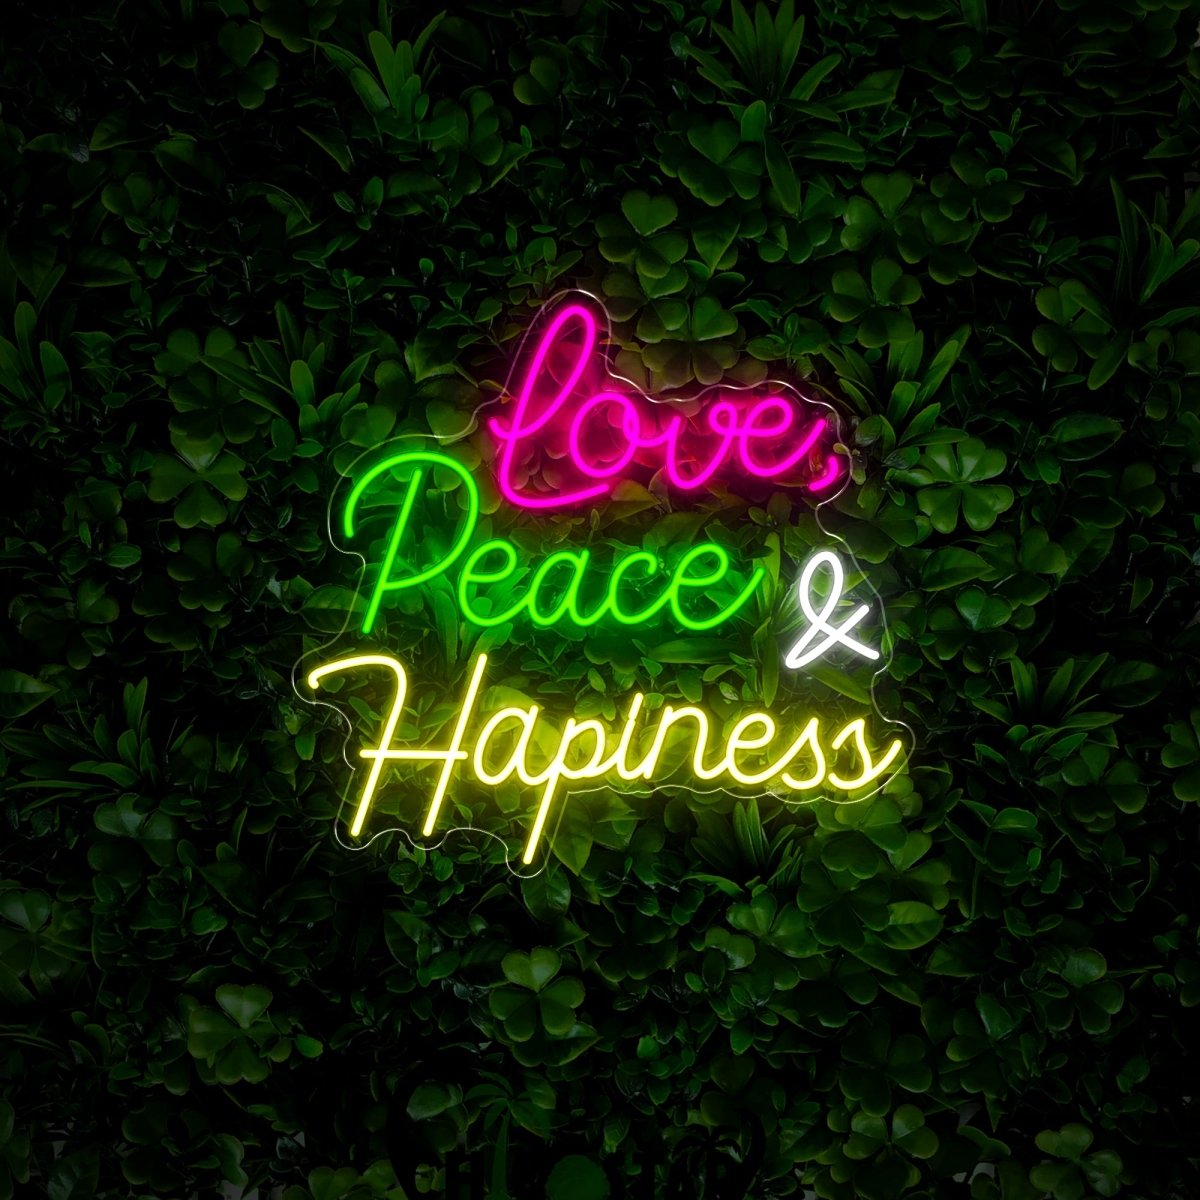 Love, Peace And Happiness Neon Sign - Reels Custom